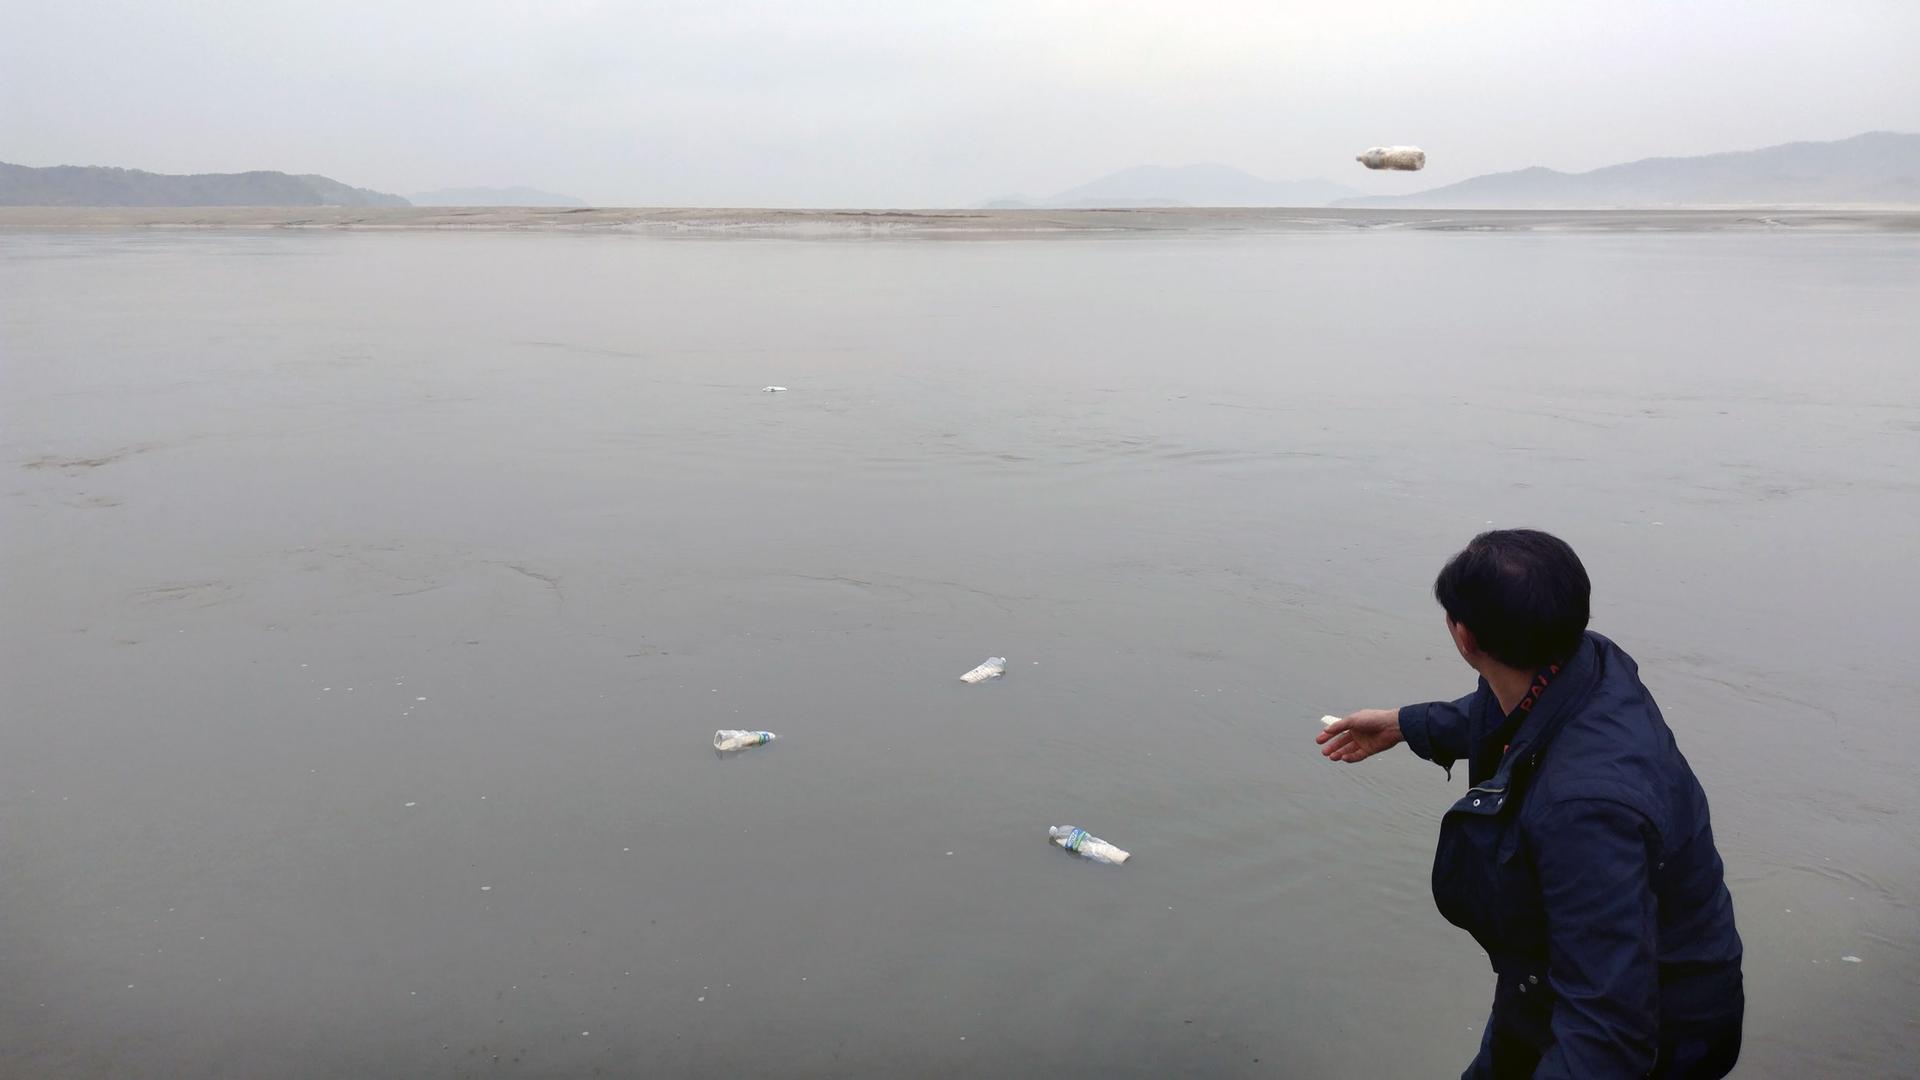 A man throws a plastic water bottle into a dark gray sea